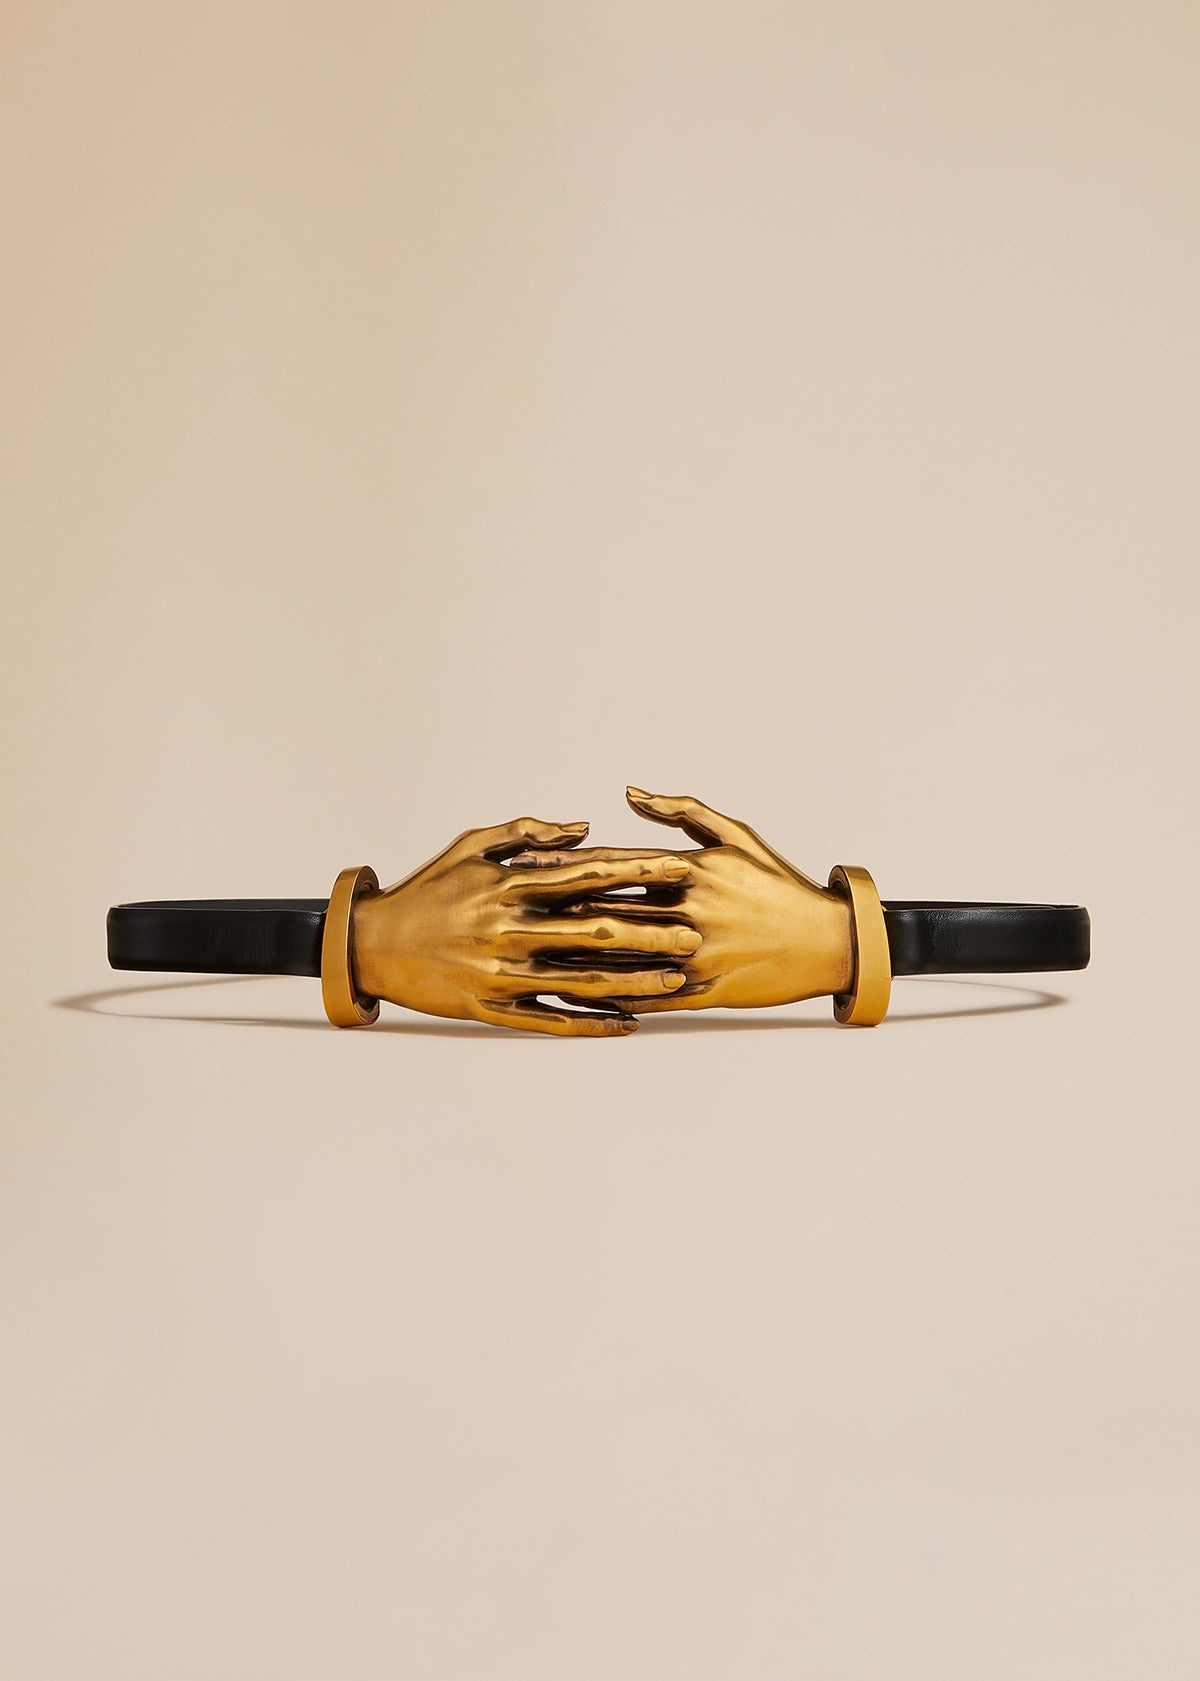 The Sculpted Hands Belt in Black Leather with Antique Gold - 1